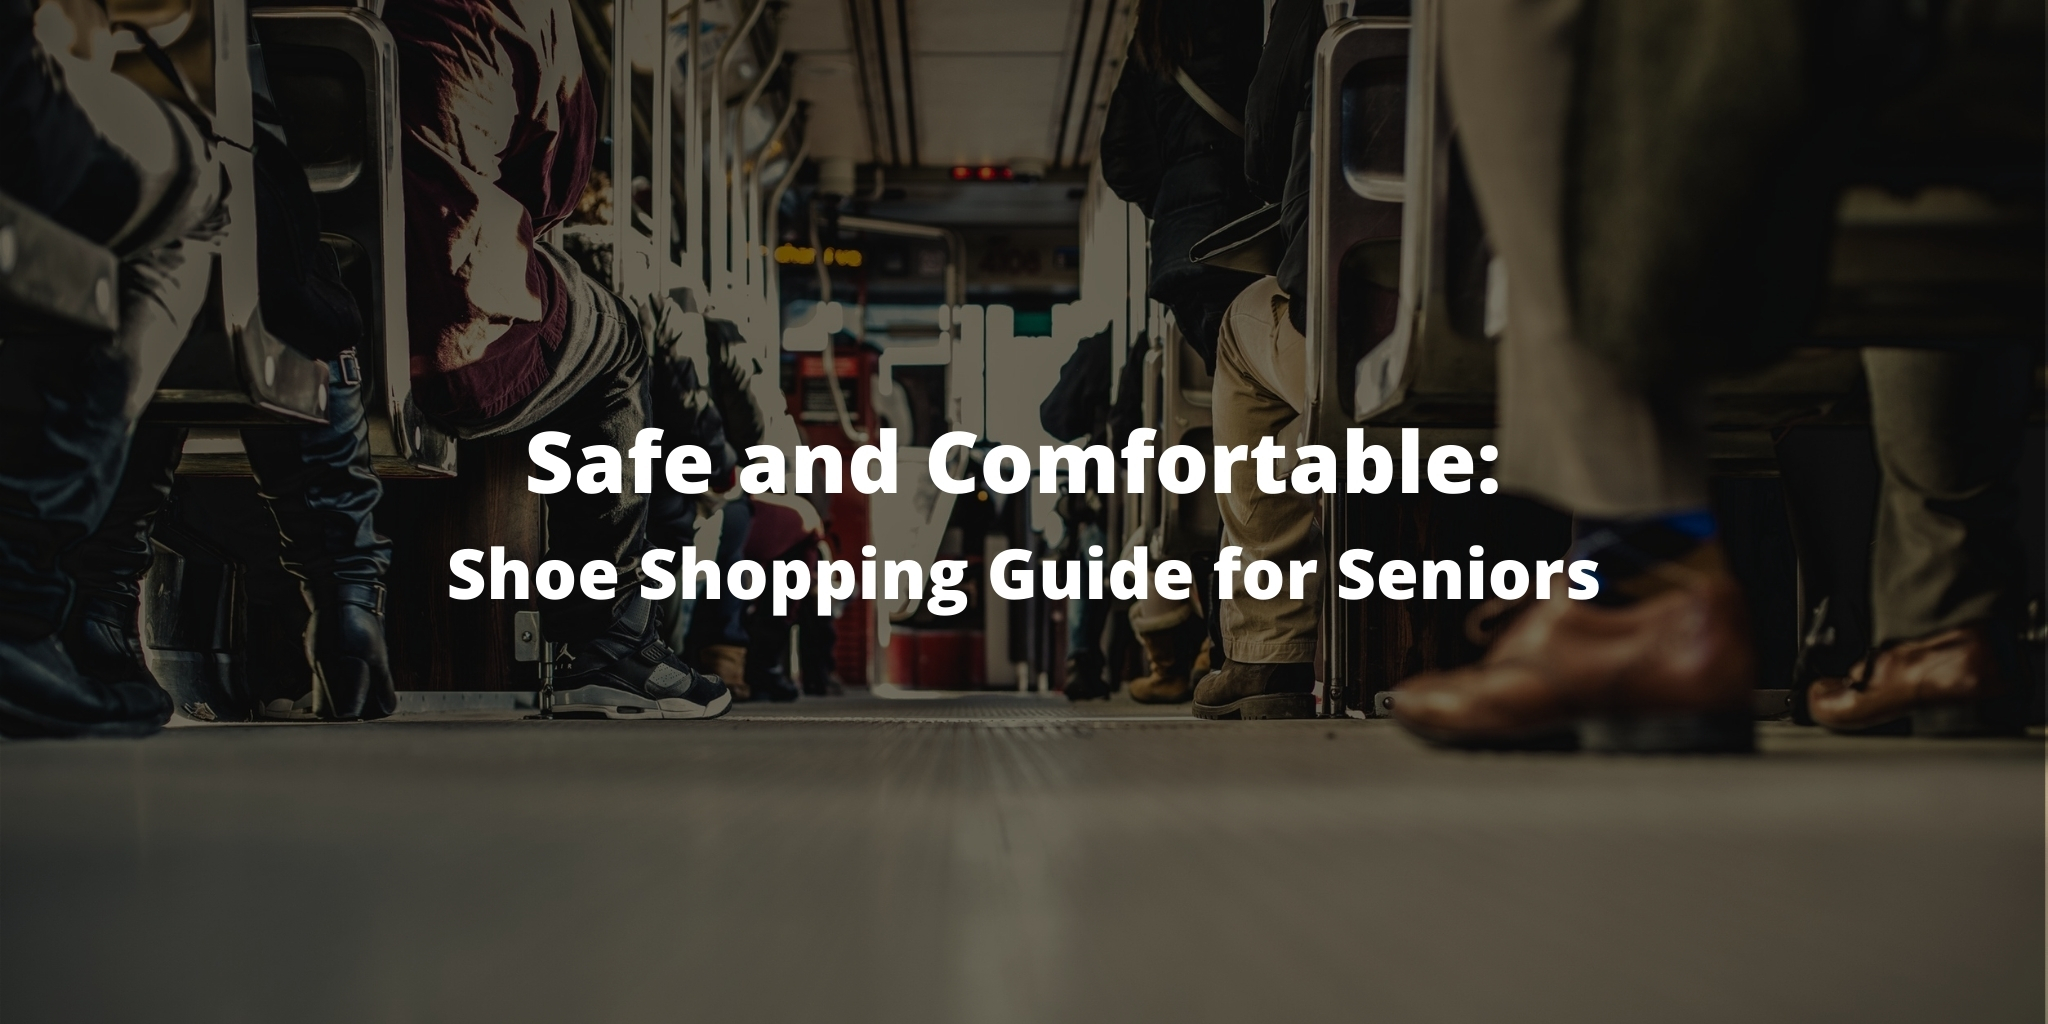 Safe and Comfortable: Shoe Shopping Guide for Seniors